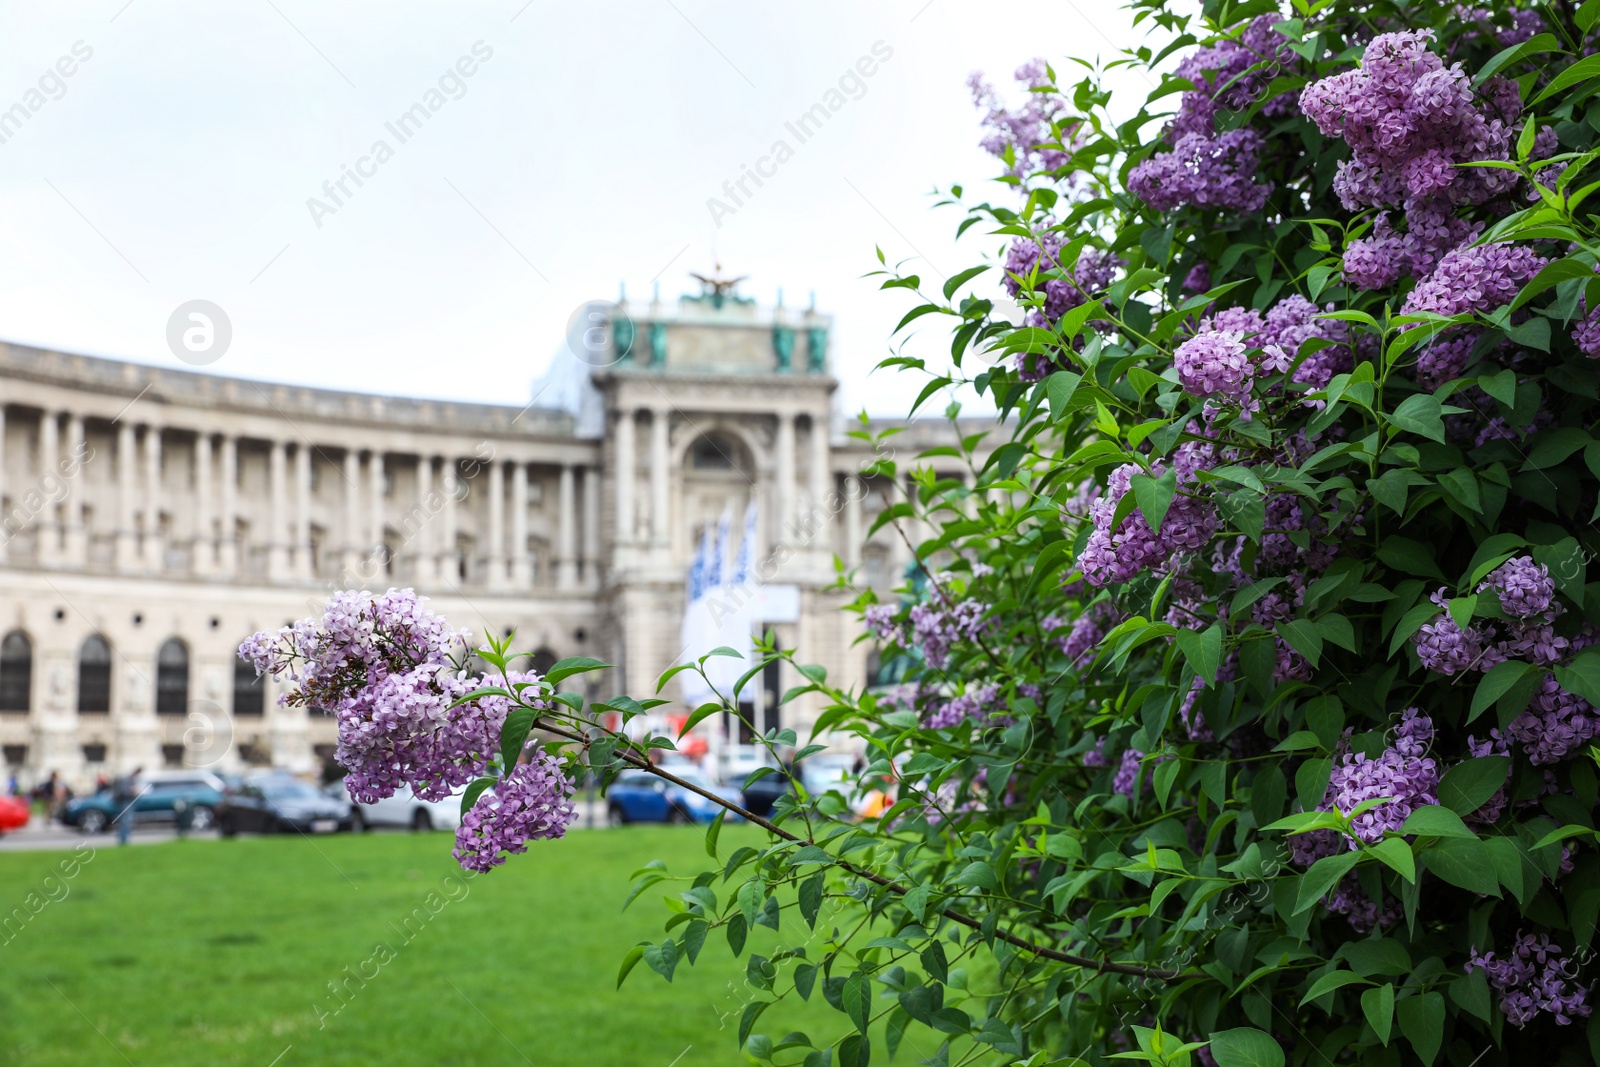 Photo of VIENNA, AUSTRIA - APRIL 26, 2019: Blooming lilac bush in front of Hofburg Palace on Heldenplatz